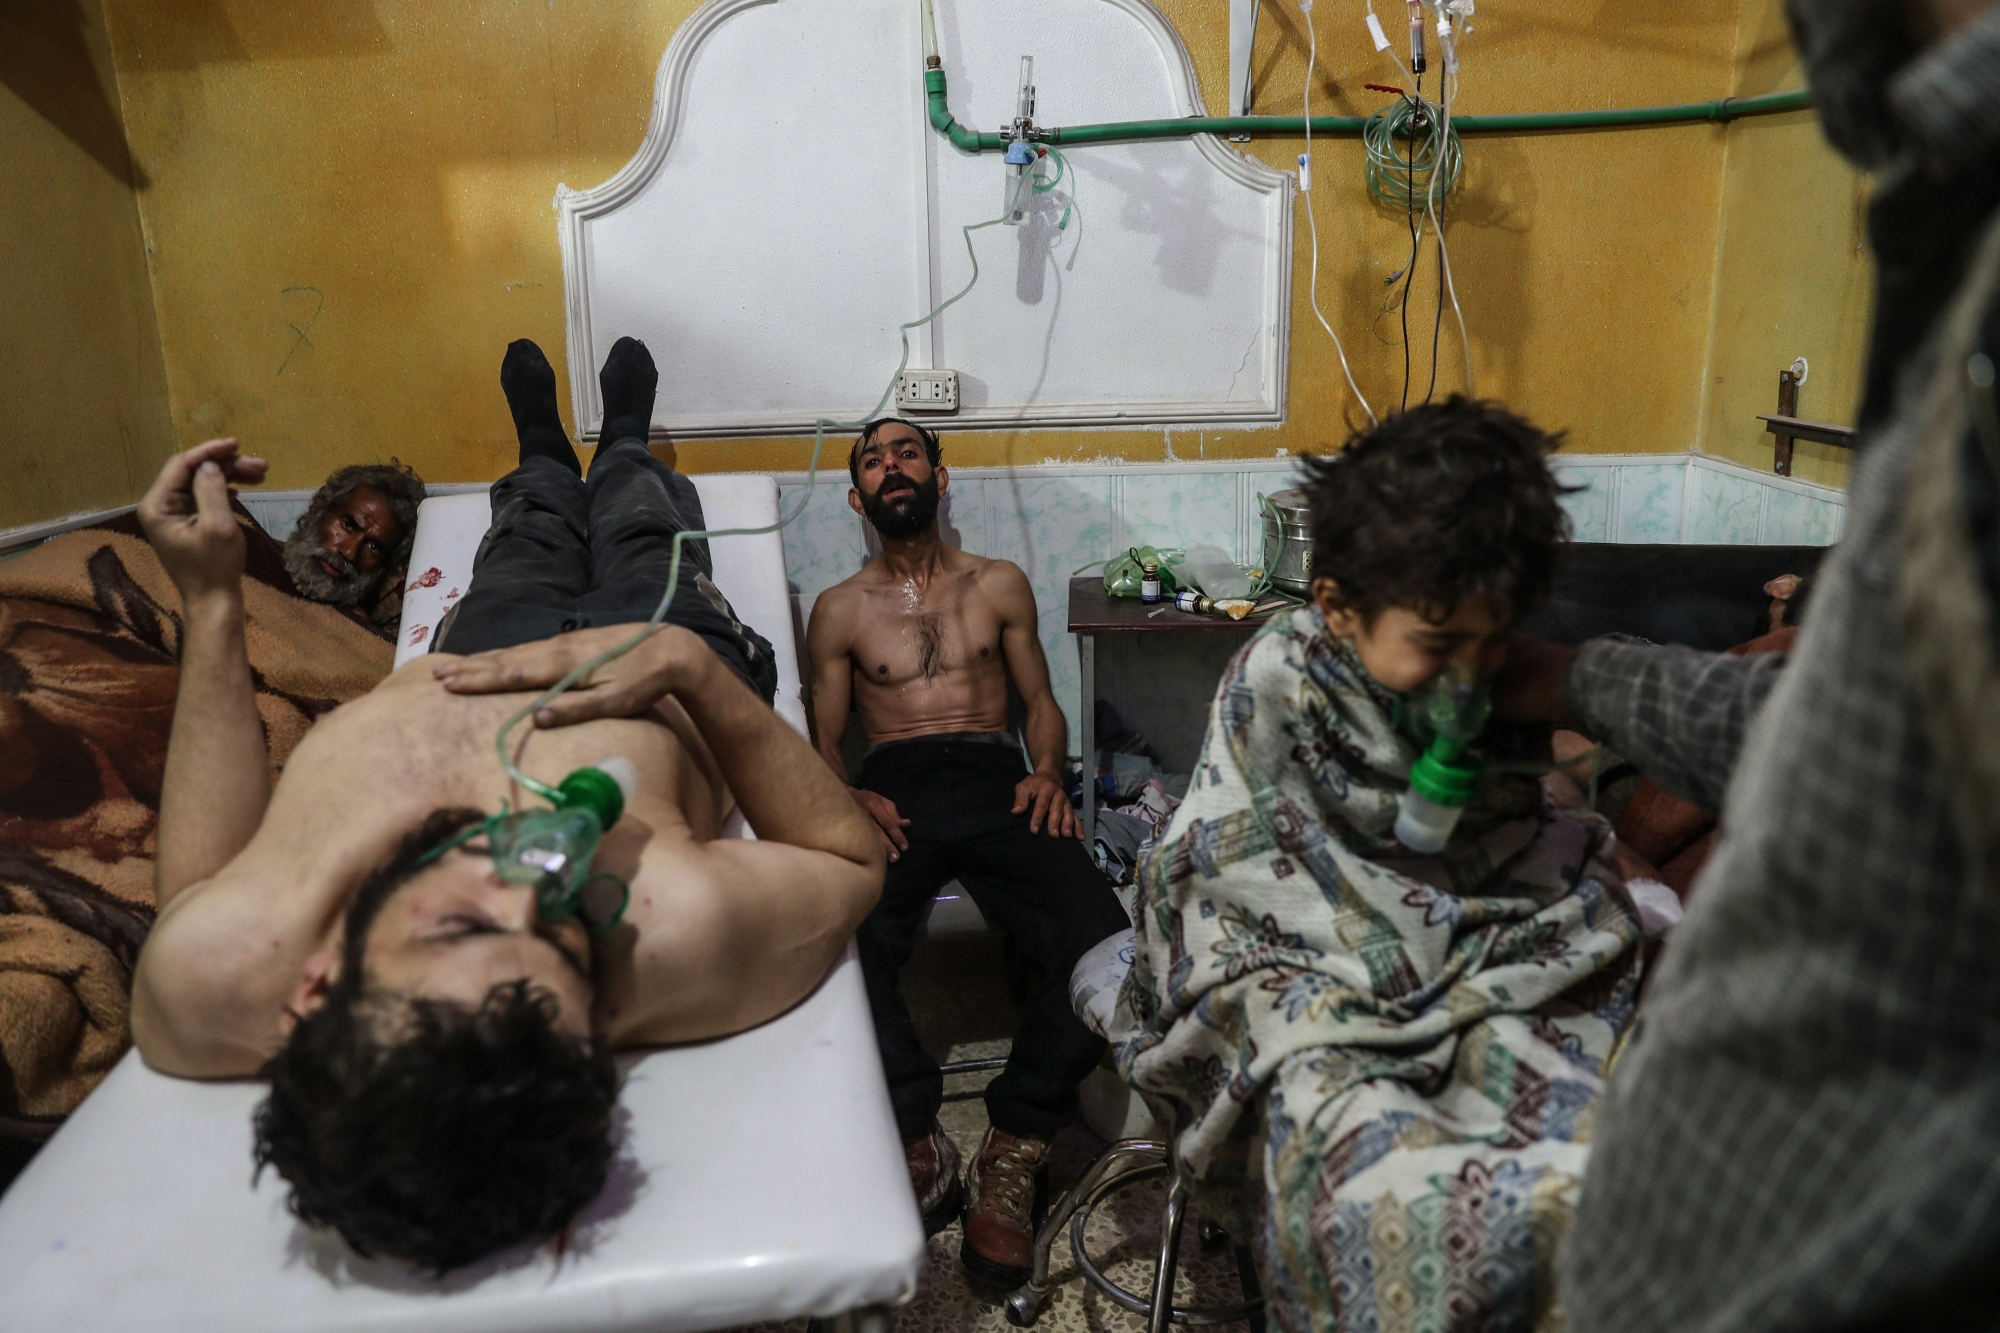 epa06565557 Affected people receive treatment after a gas attack on al-Shifunieh village, in Eastern Ghouta, Syria, 25 February 2018 (issued 26 February 2018). According to activists working in the area, more than 18 people were affected by poisenous gas, and one child was killed, during an attack on the village of al-Shifunieh. Government forces loyal to President Bashar al-Assad are currently conducting an air and ground offensive in Eastern Ghouta. The offensive was initiated soon after the United Nations passed a resolution calling for a 30-day cessation of hostilities in Syria.  EPA/MOHAMMED BADRA SYRIA CONFLICT